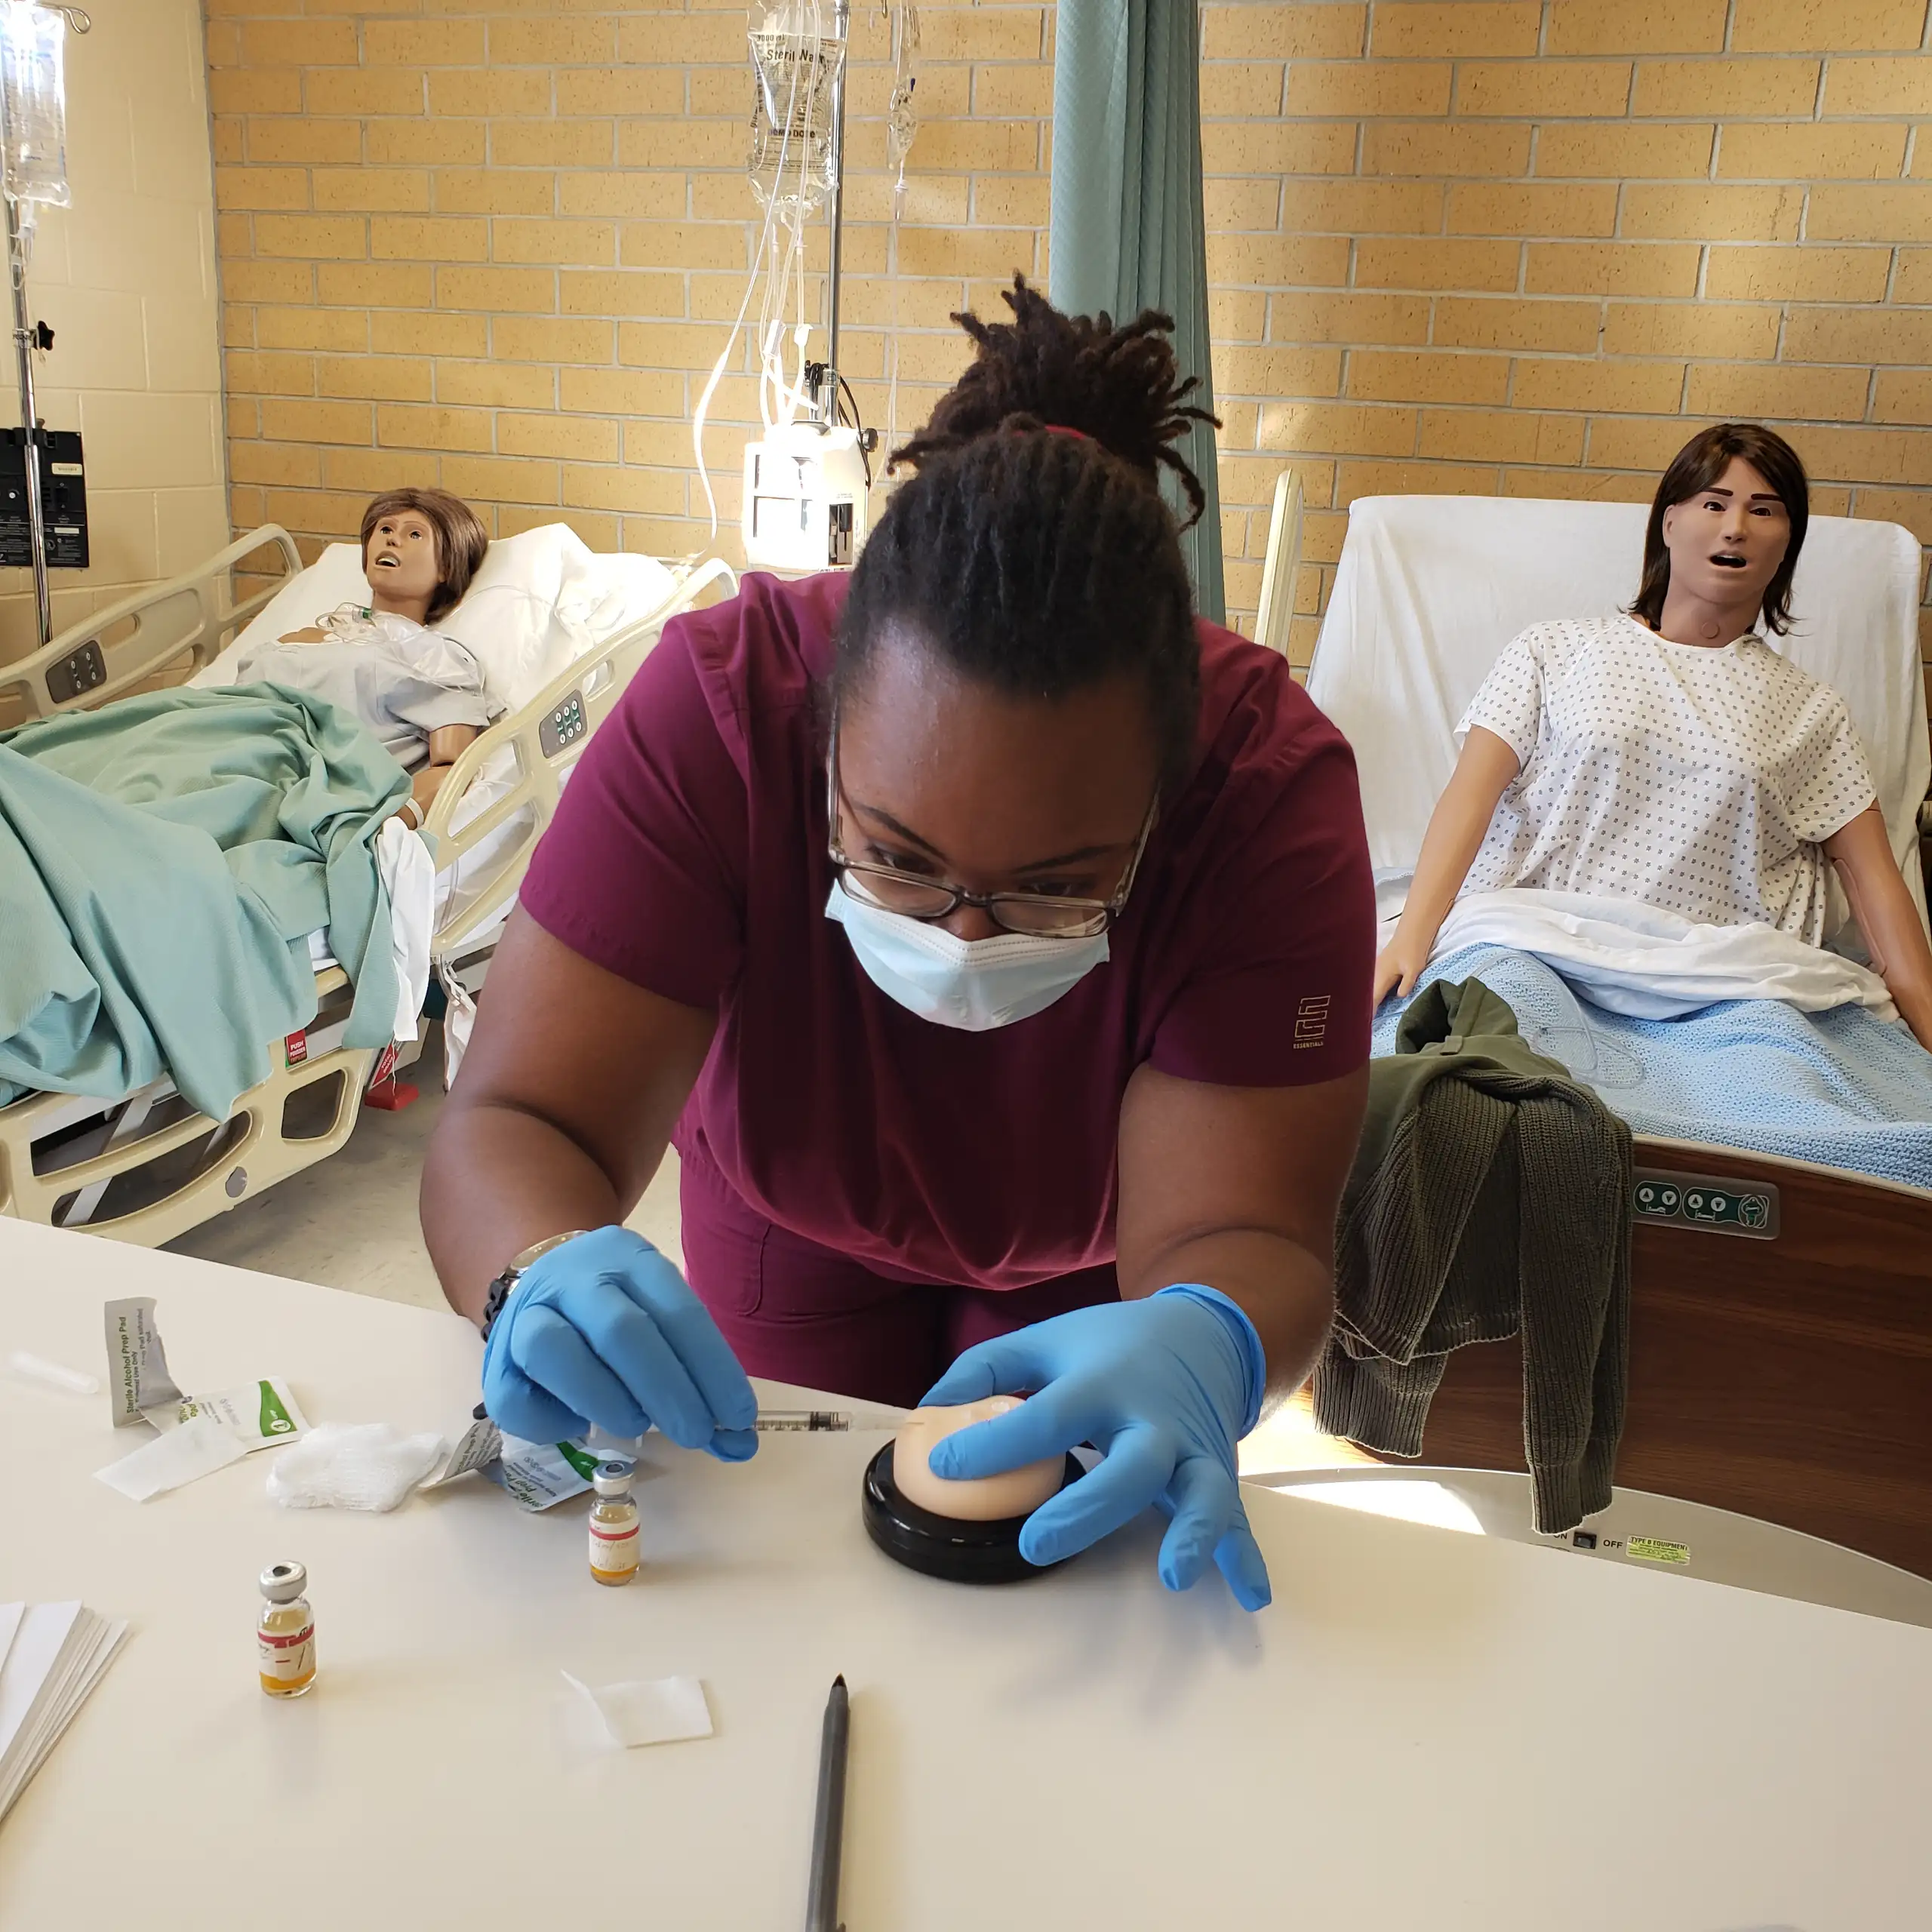 Nursing student performing a procedure in class.